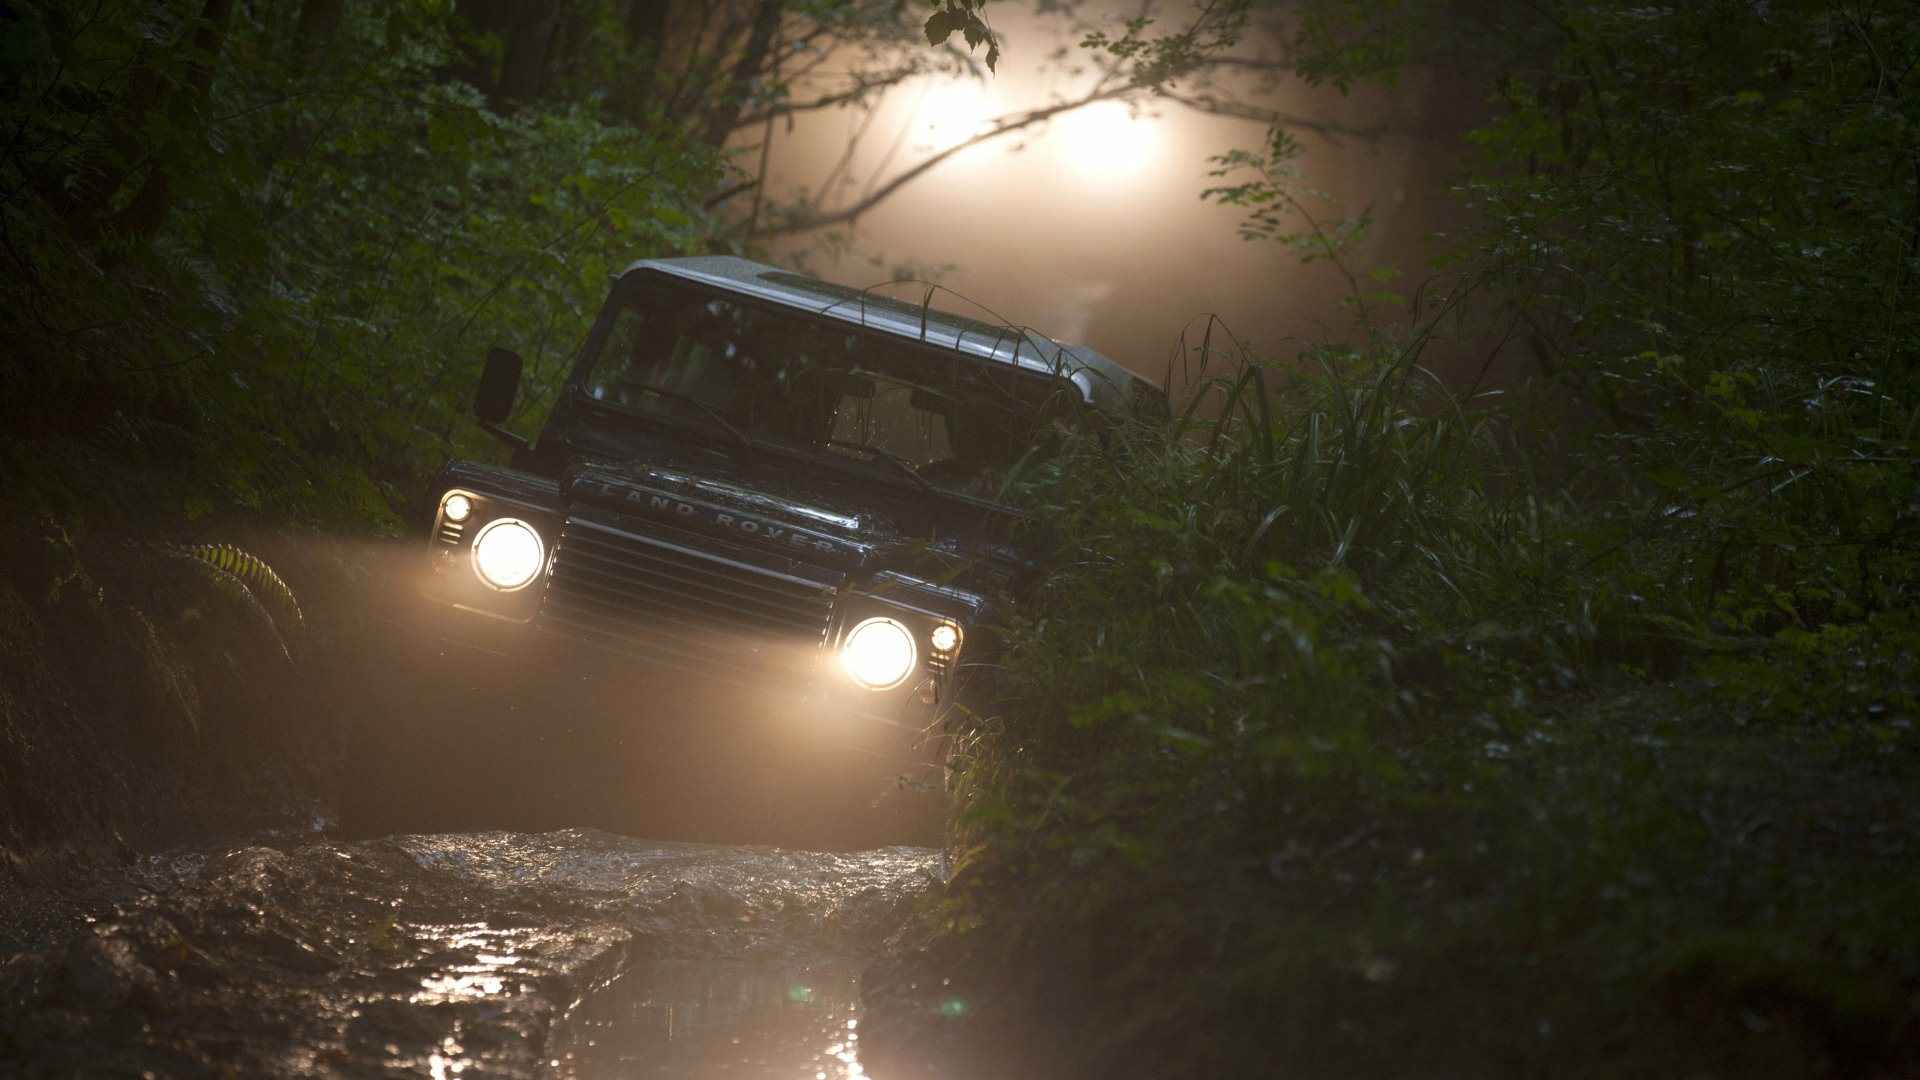 Land Rover Defender Off Road Wallpaper High Quality